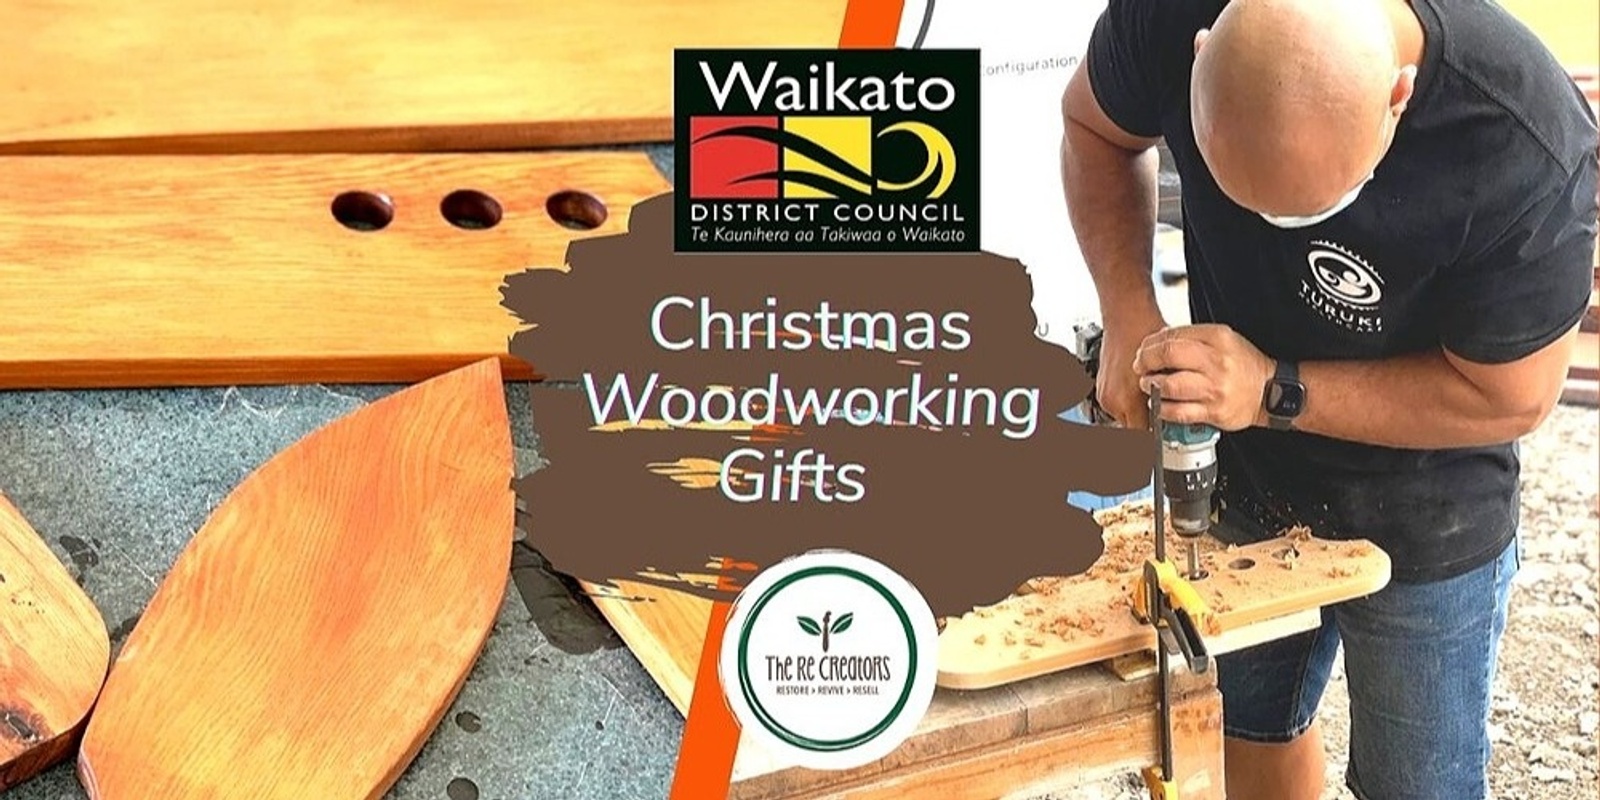 Christmas Woodworking Gifts: Make a Chopping Board and Planter Box, Pōkeno  Hall, Thursday 15 December, 5.00pm to 8.00pm